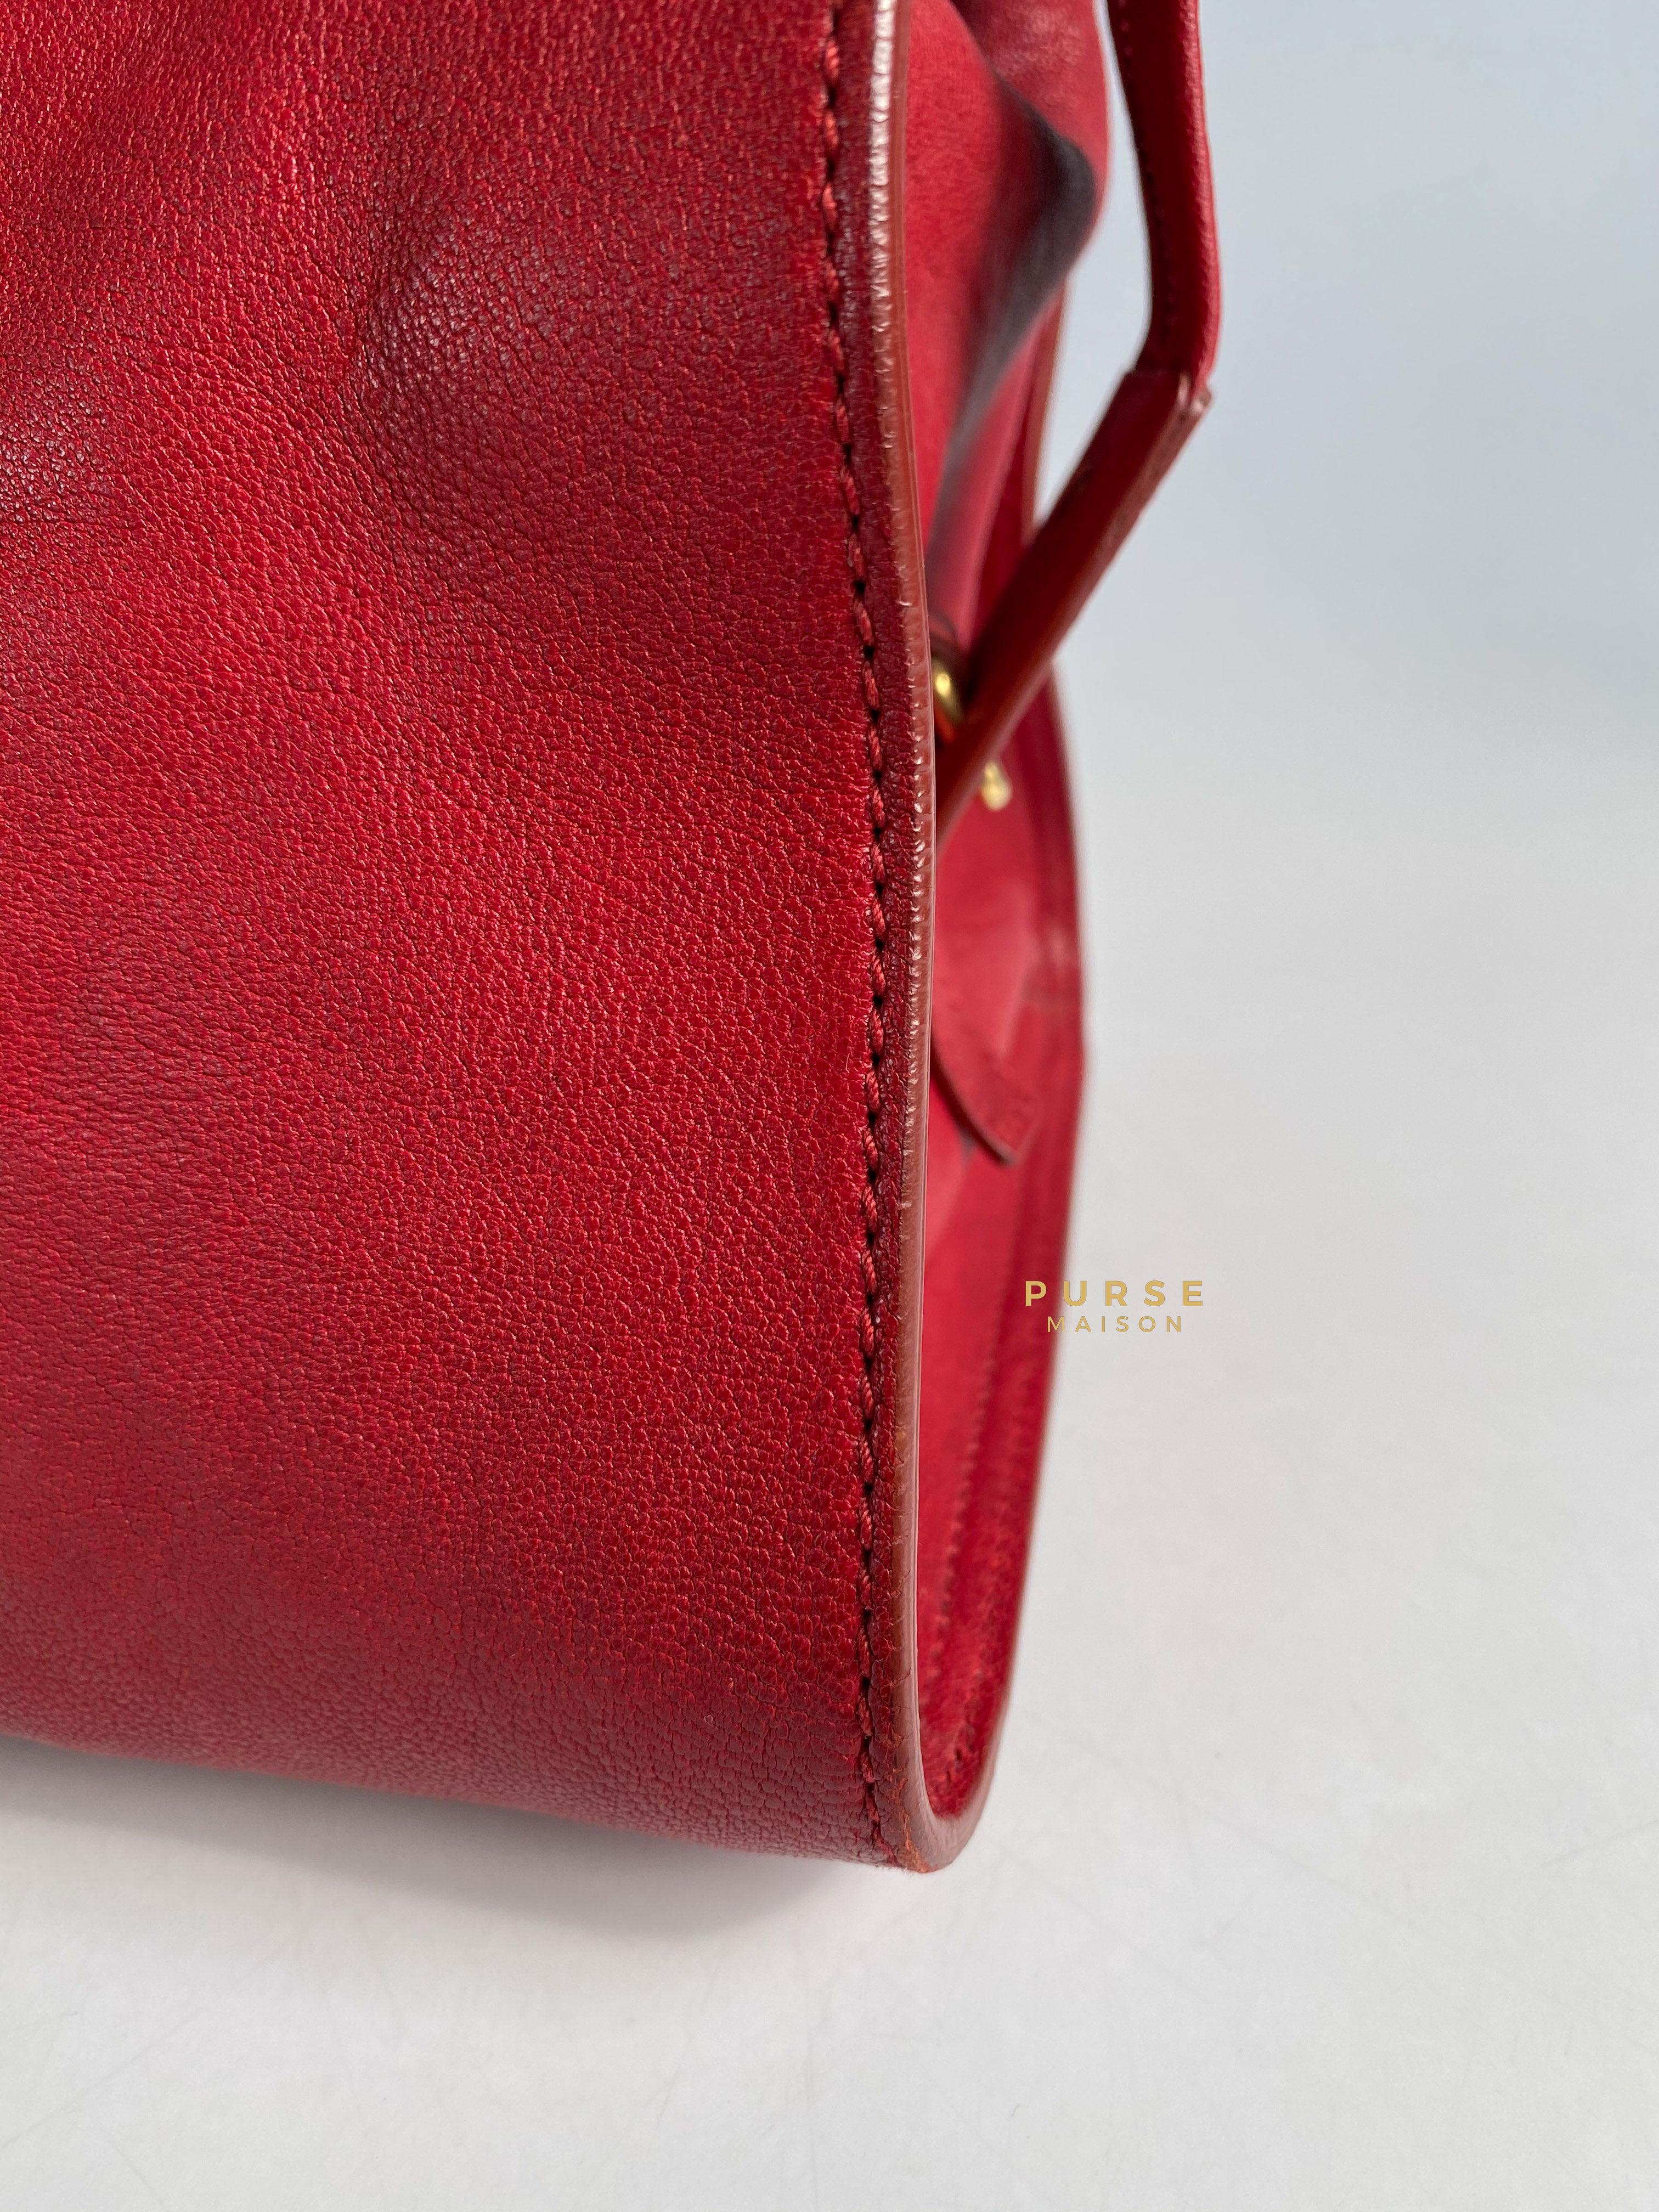 YSL Cabas Chyc Medium in Gold Hardware (Red) | Purse Maison Luxury Bags Shop